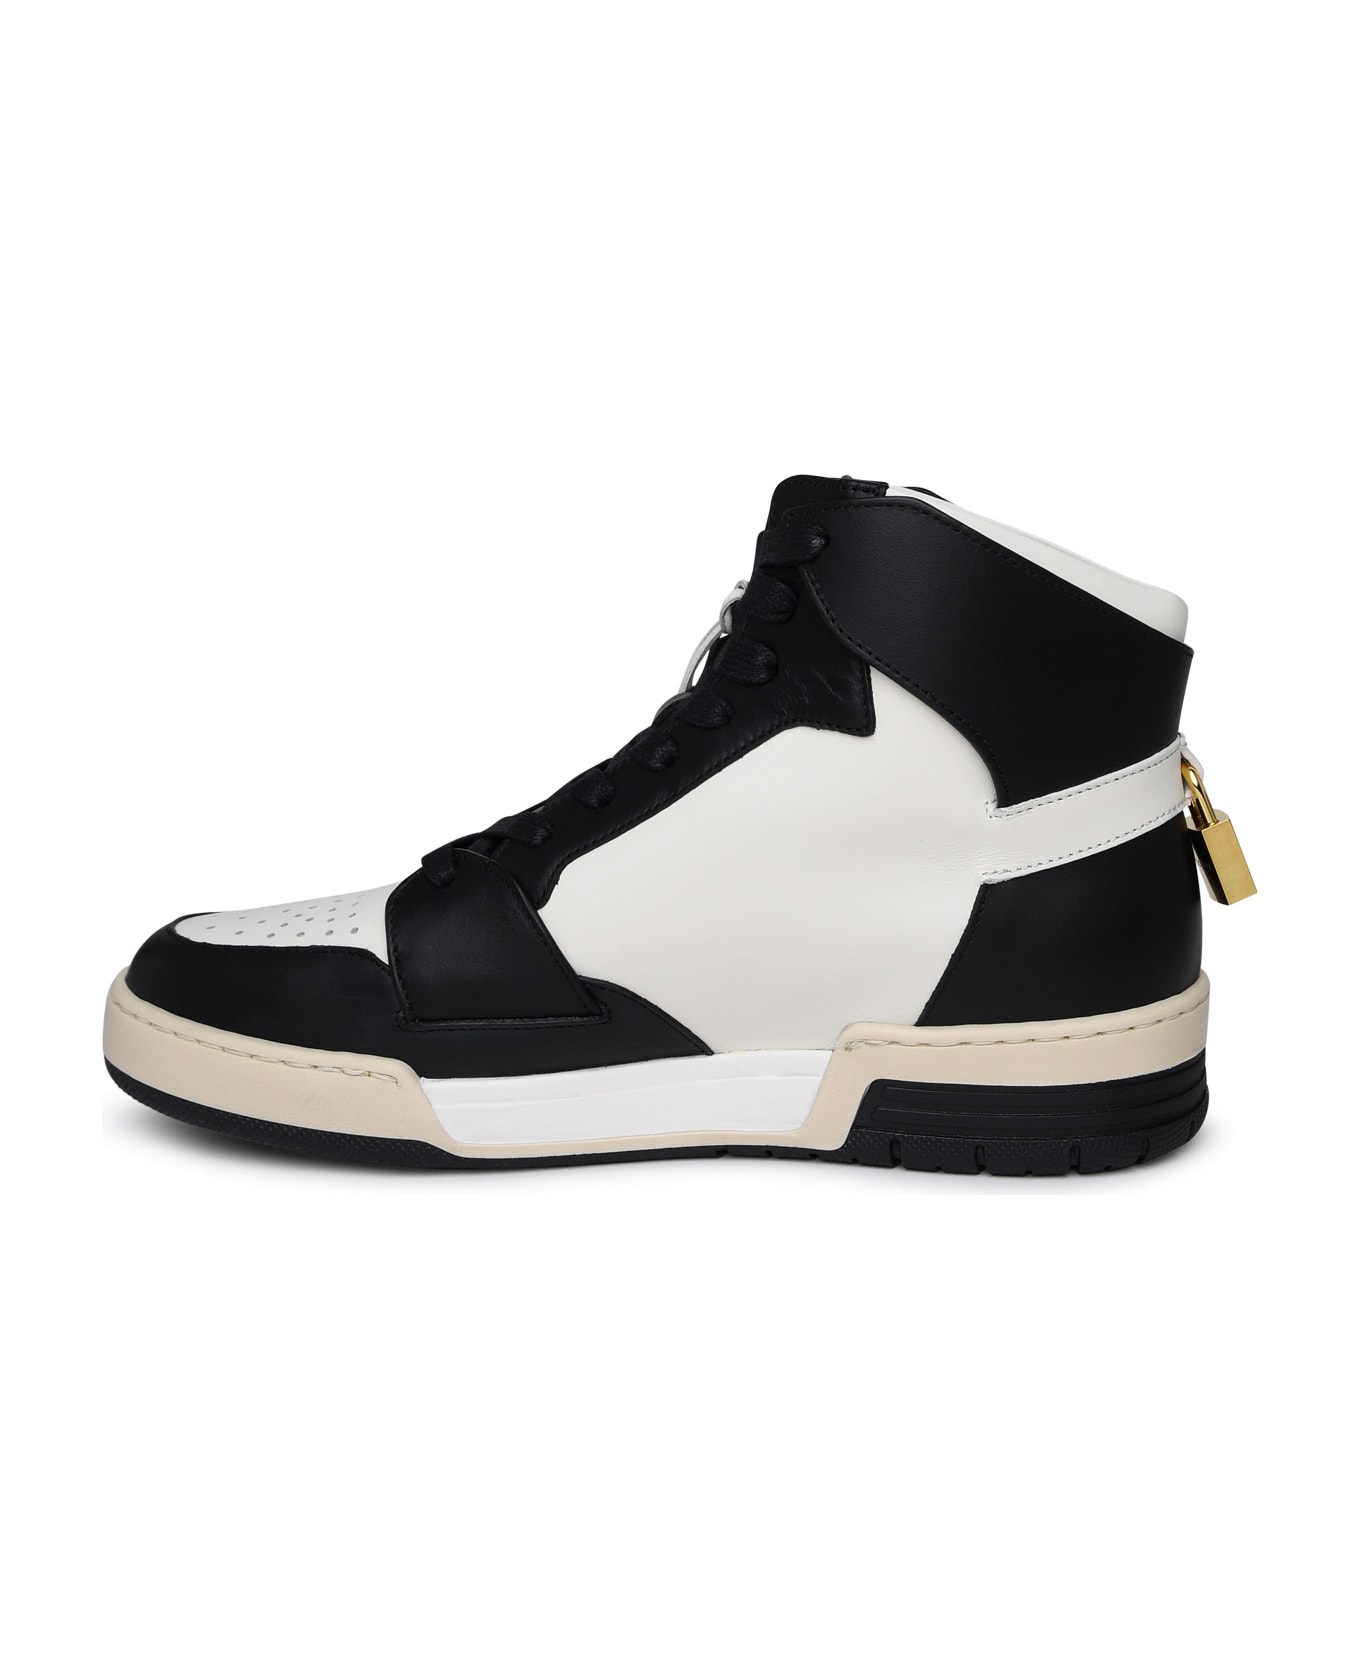 Buscemi 'air Jon' Black And White Leather Sneakers - White スニーカー